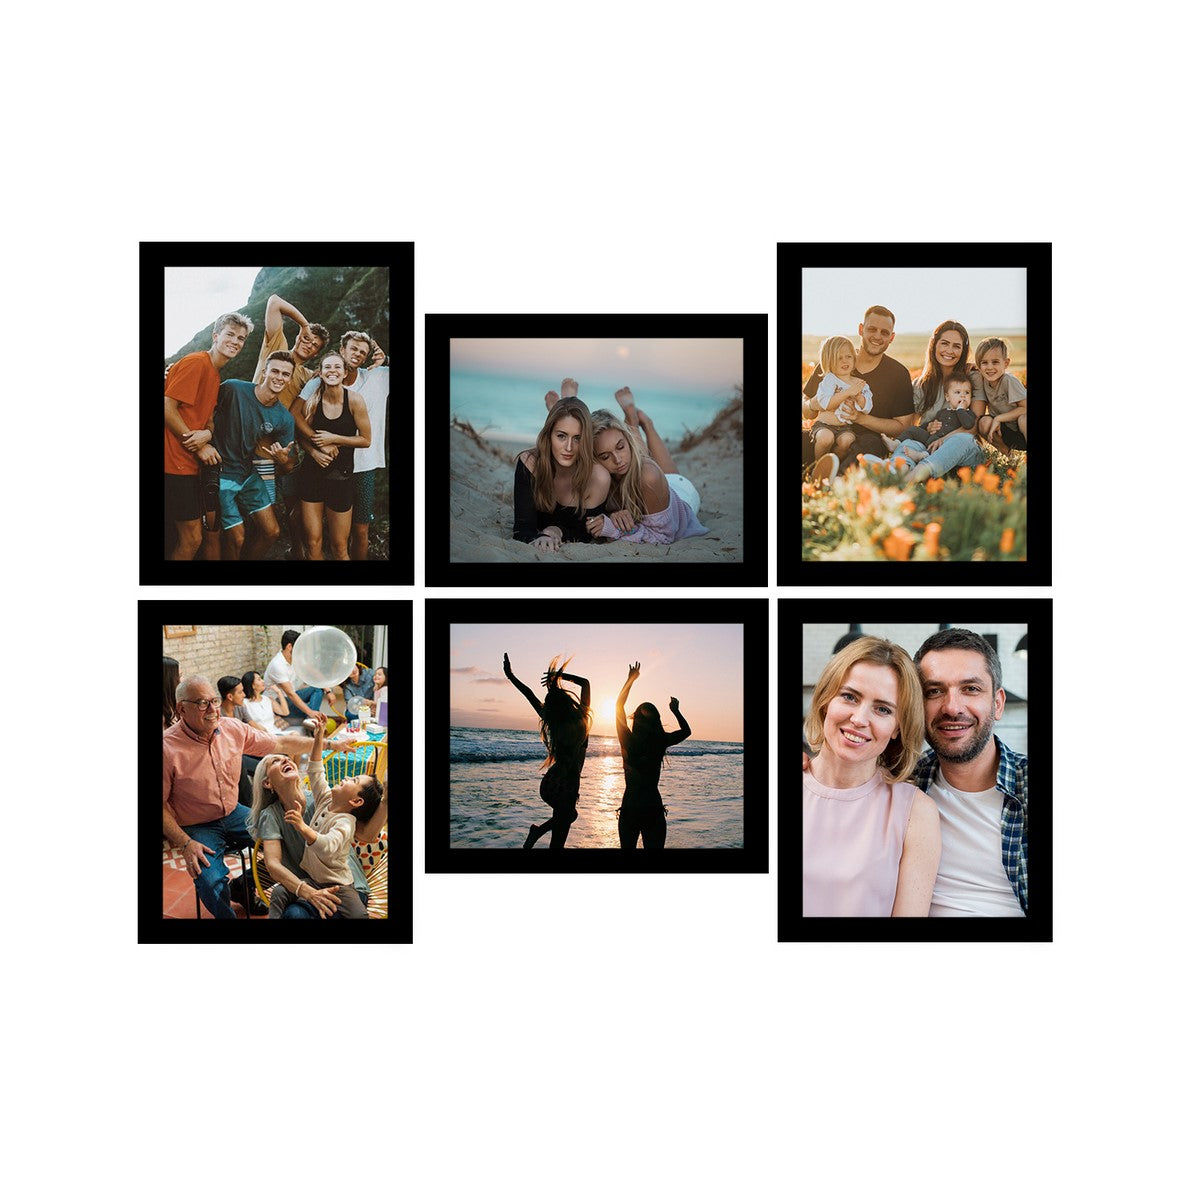 Memory Wall Collage Photo Frame - Set of 6 Photo Frames for 6 Photos of 8"x10"